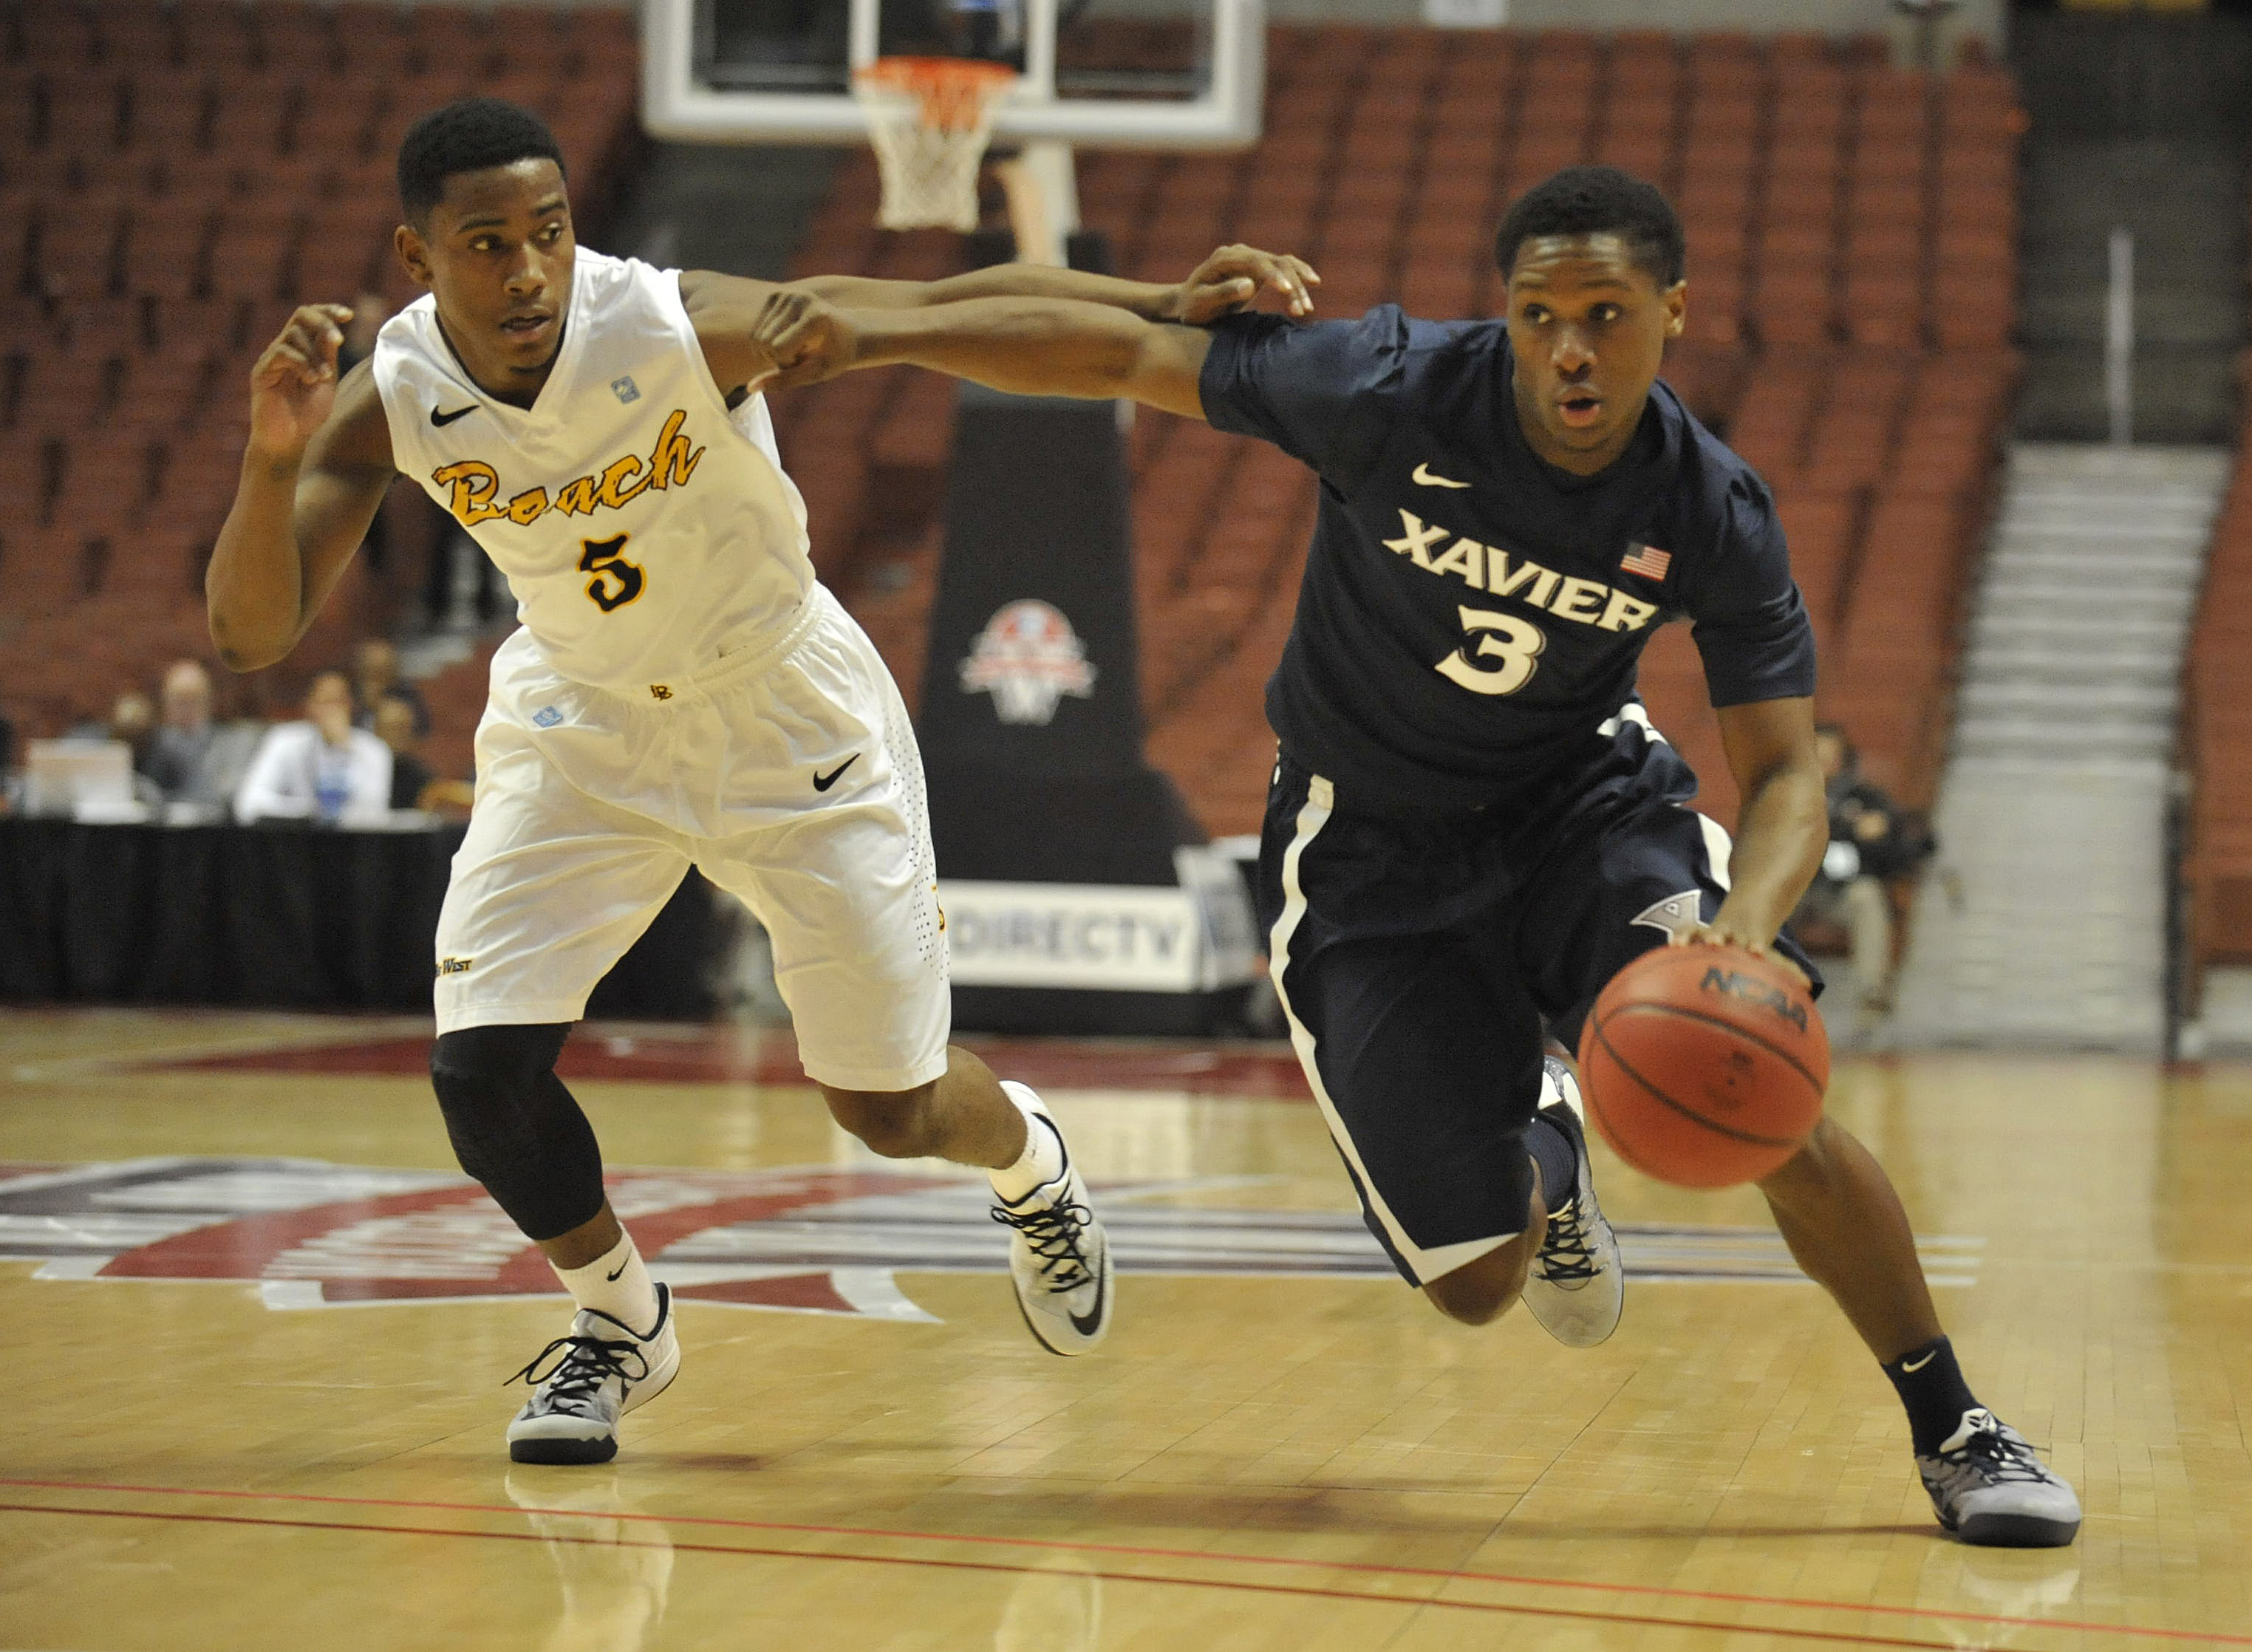 One of the few instances where an LBSU player wasn't running past his Xavier counterpart.